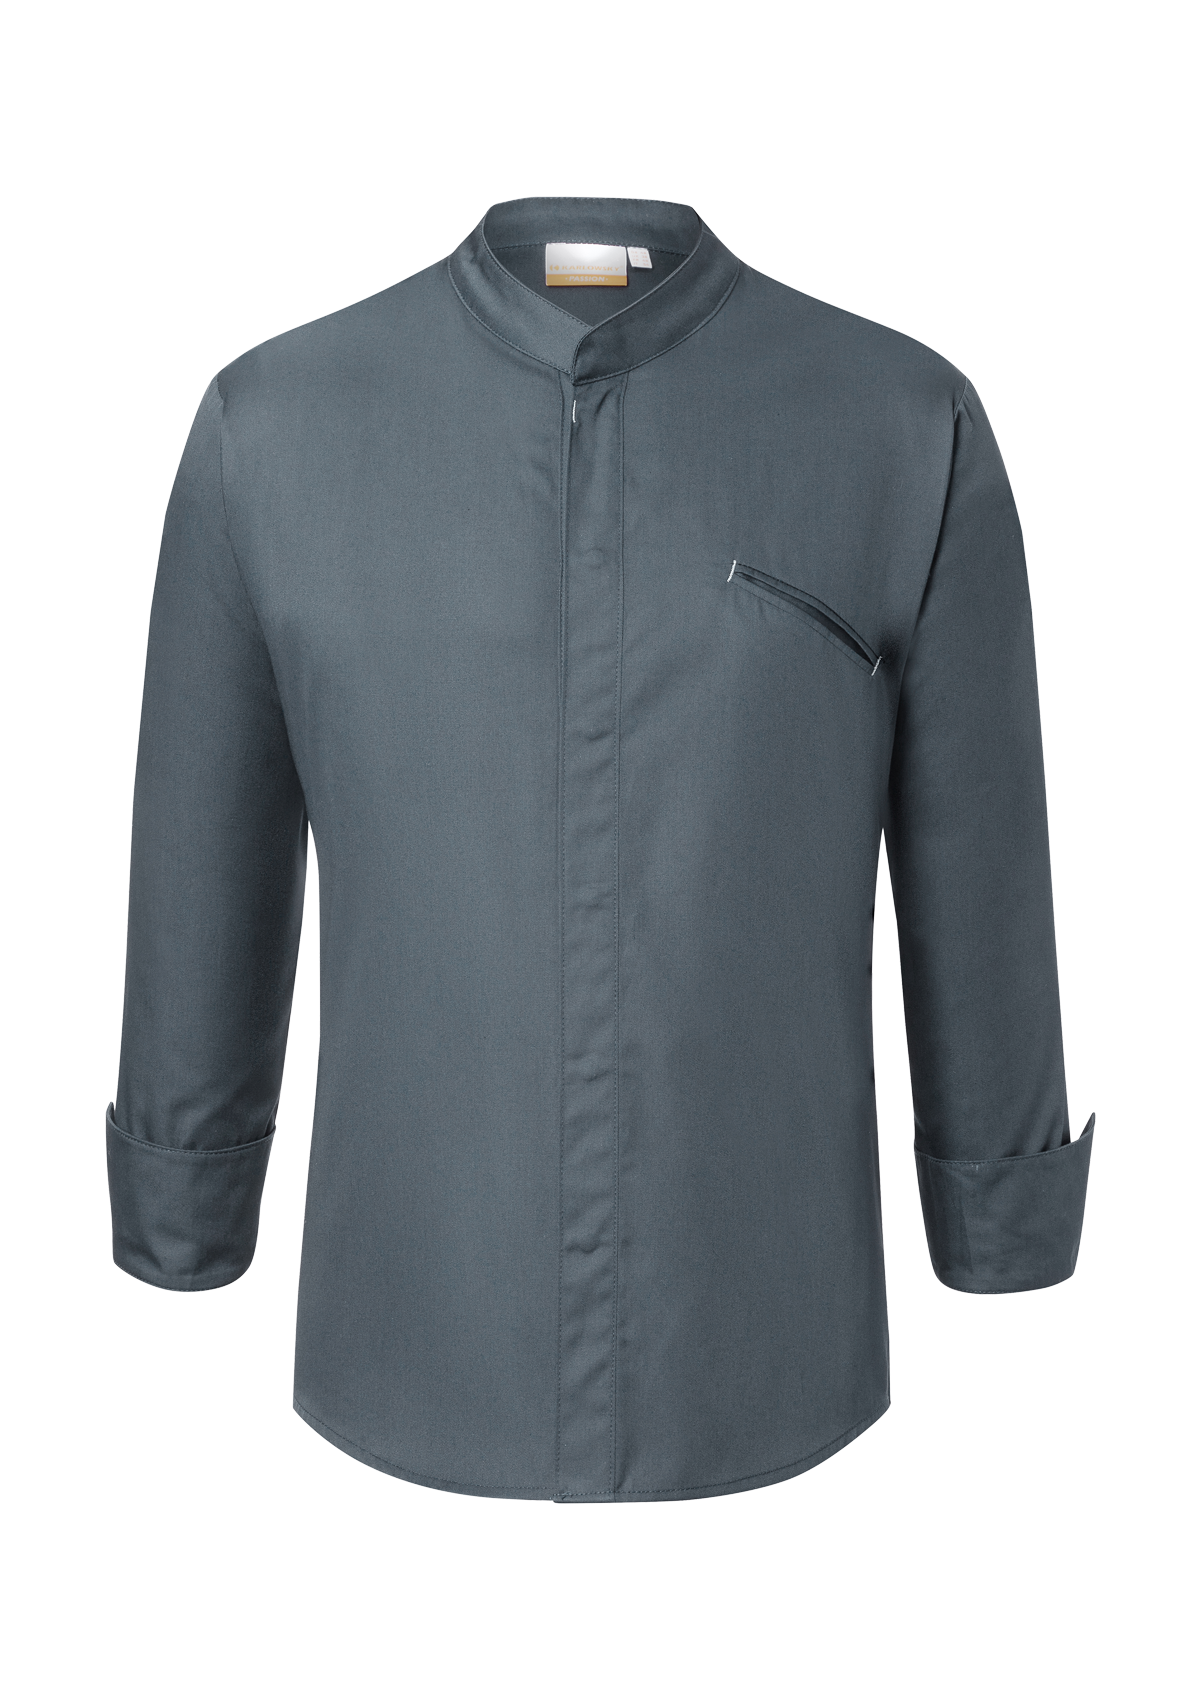 Men's Chef Jacket Long Sleeves Modern-Touch